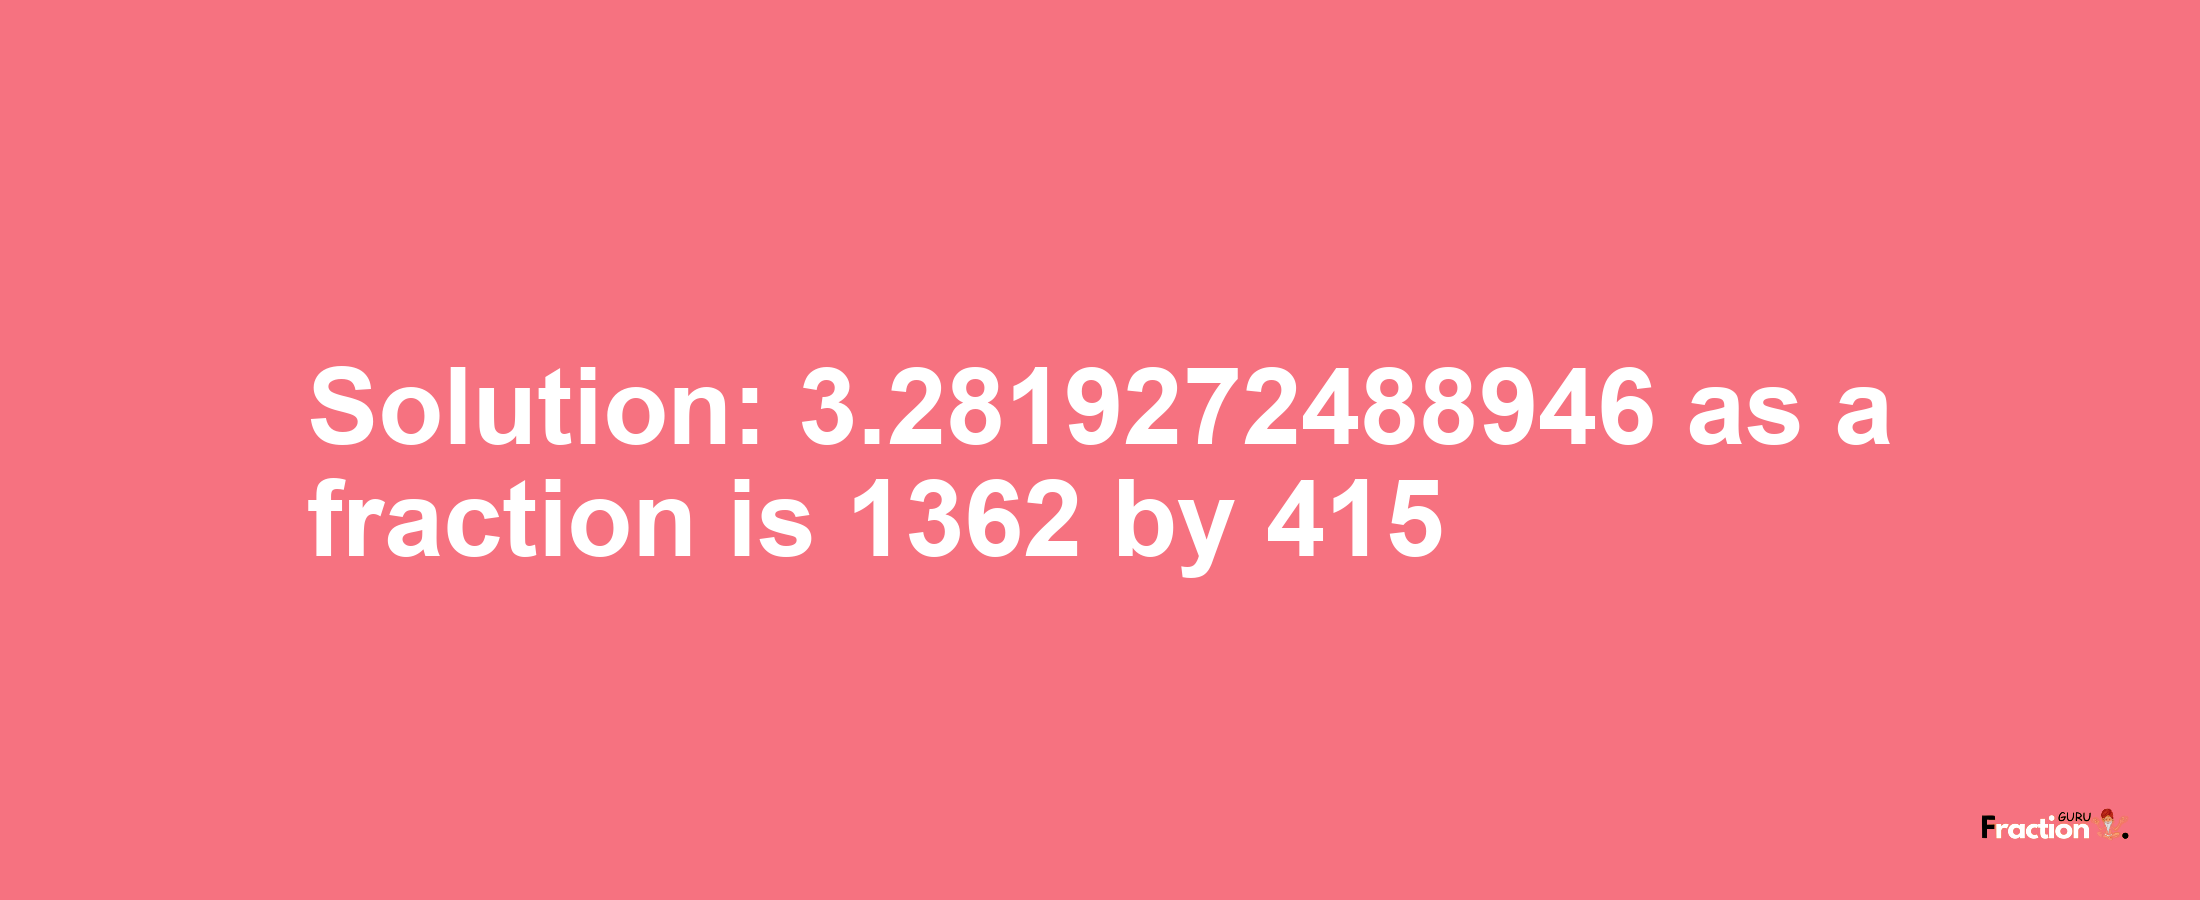 Solution:3.2819272488946 as a fraction is 1362/415